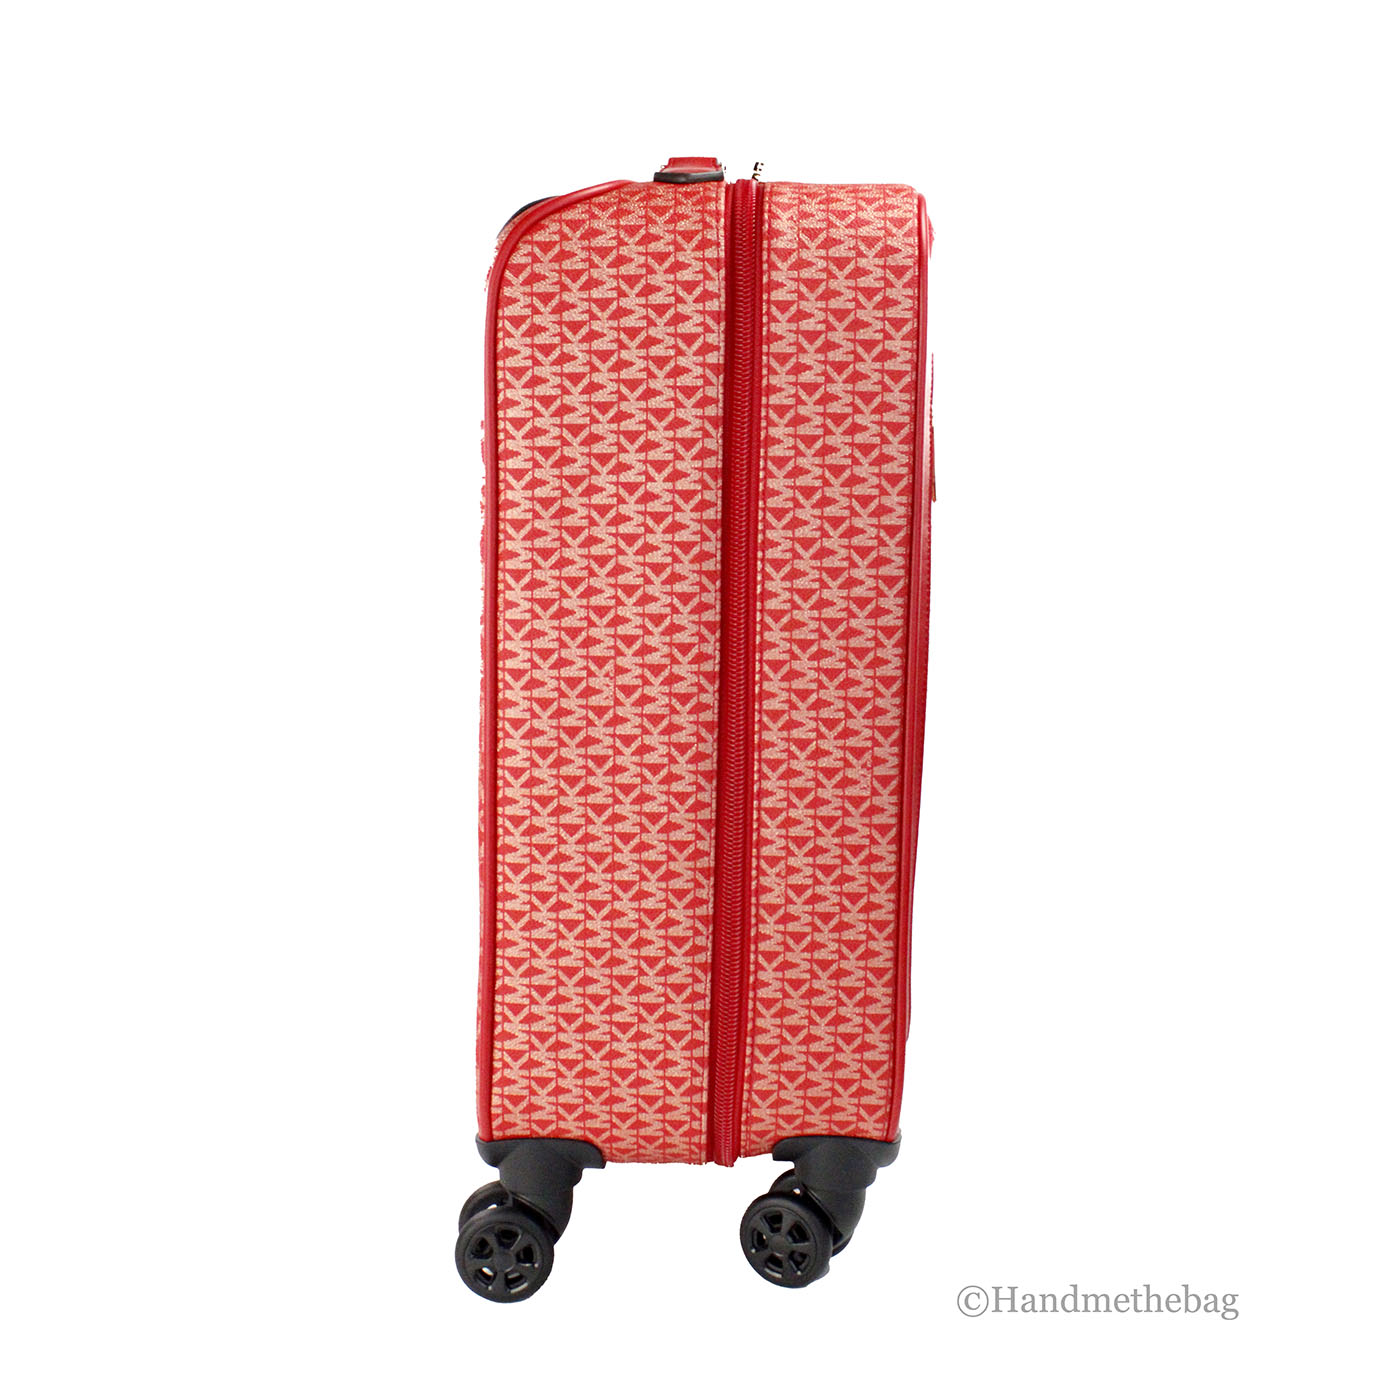 Michael Kors Travel Small Red Trolley Rolling Suitcase